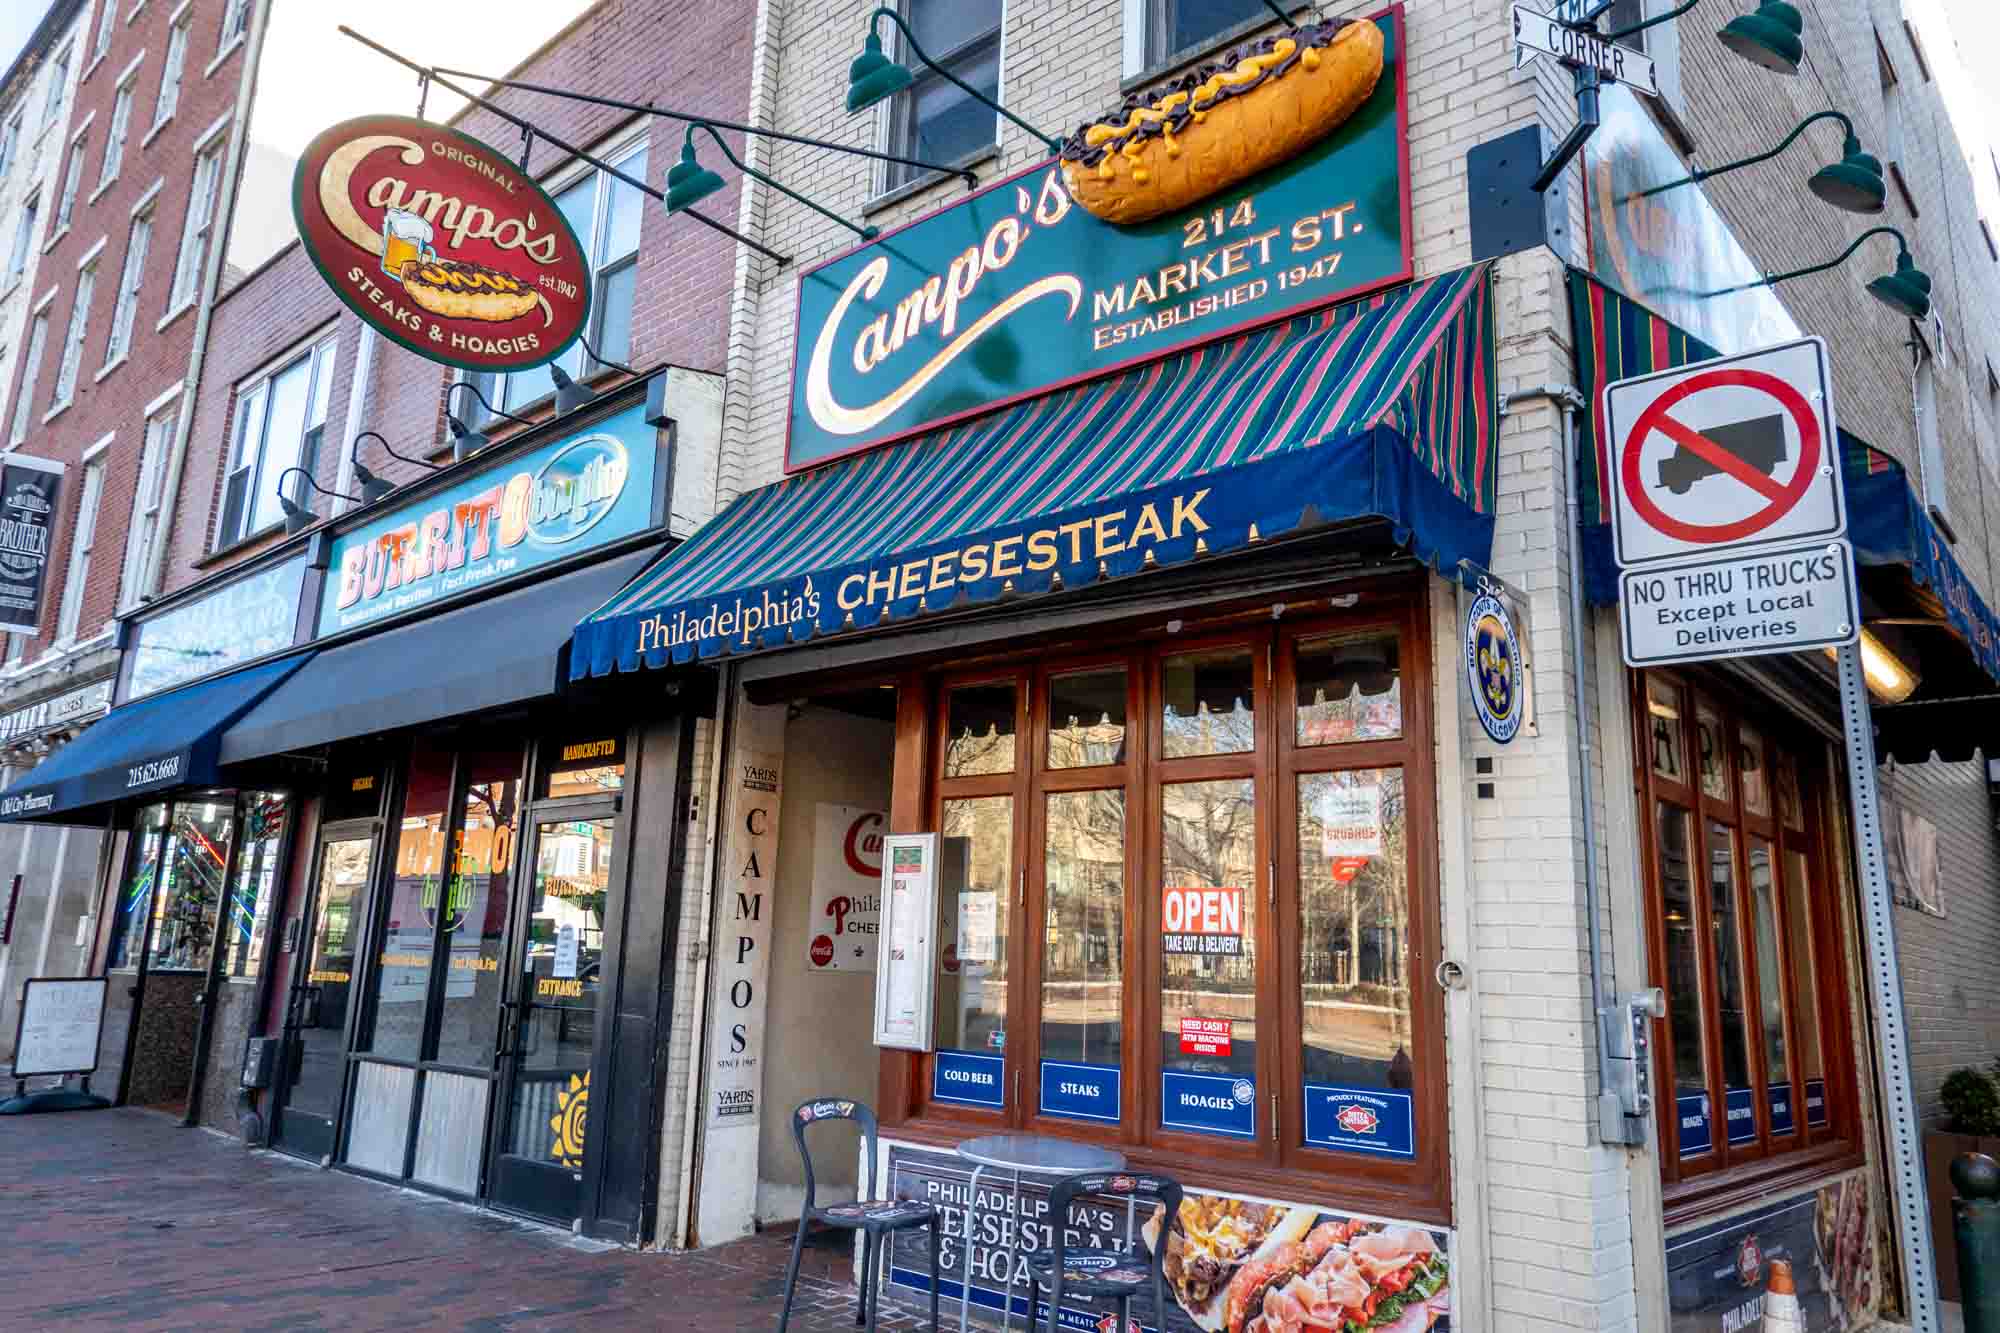 Exterior of a building with signage for "Campo's" and "Philadelphia's cheesesteak."